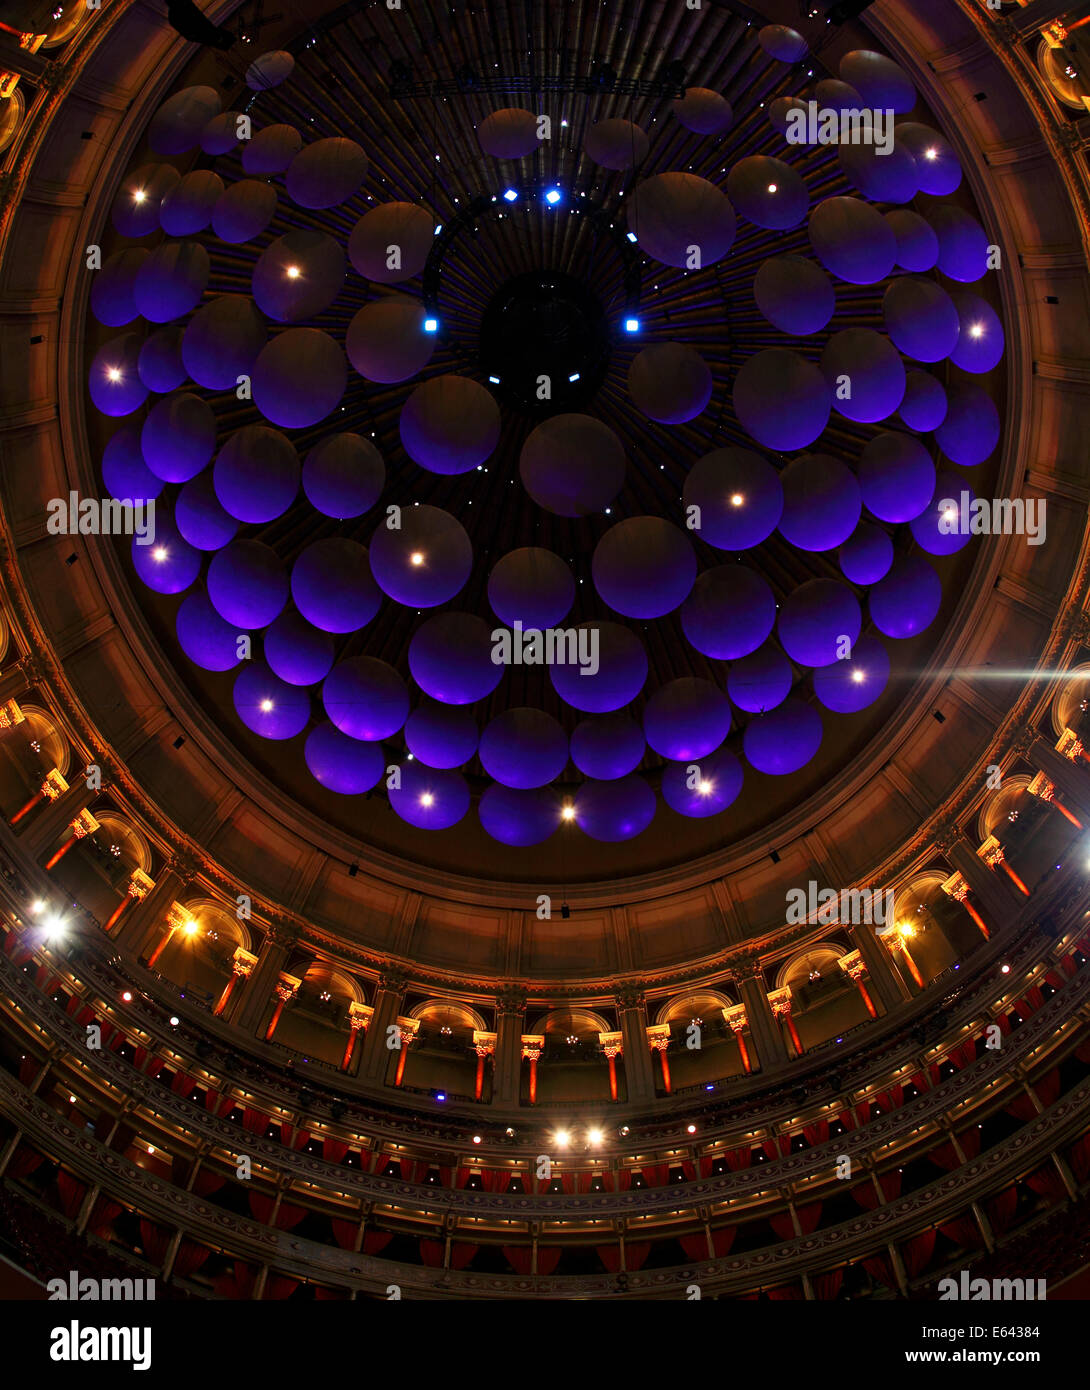 Acoustic Sound Panels In The Roof Of The Royal Albert Hall London